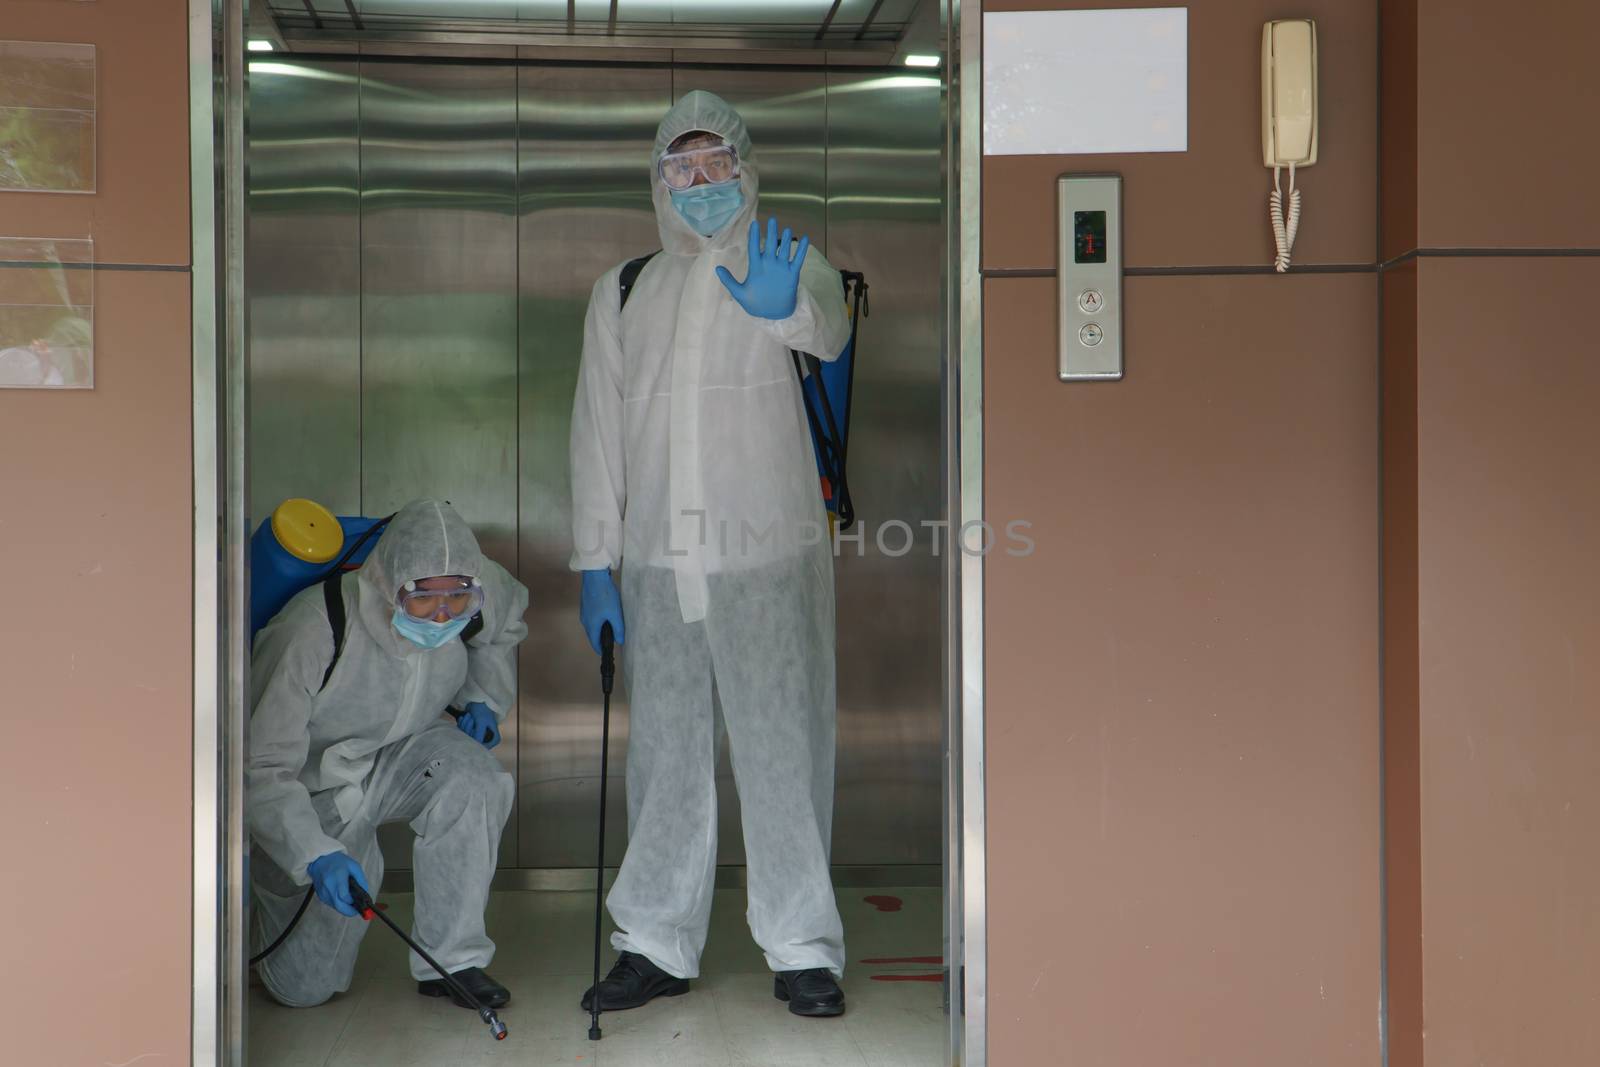 Professional male workers in protective clothing and masks are spraying disinfectants, cleaning, controlling the virus, and bacteria in contaminated areas. Specialist Show hand to stop coronavirus